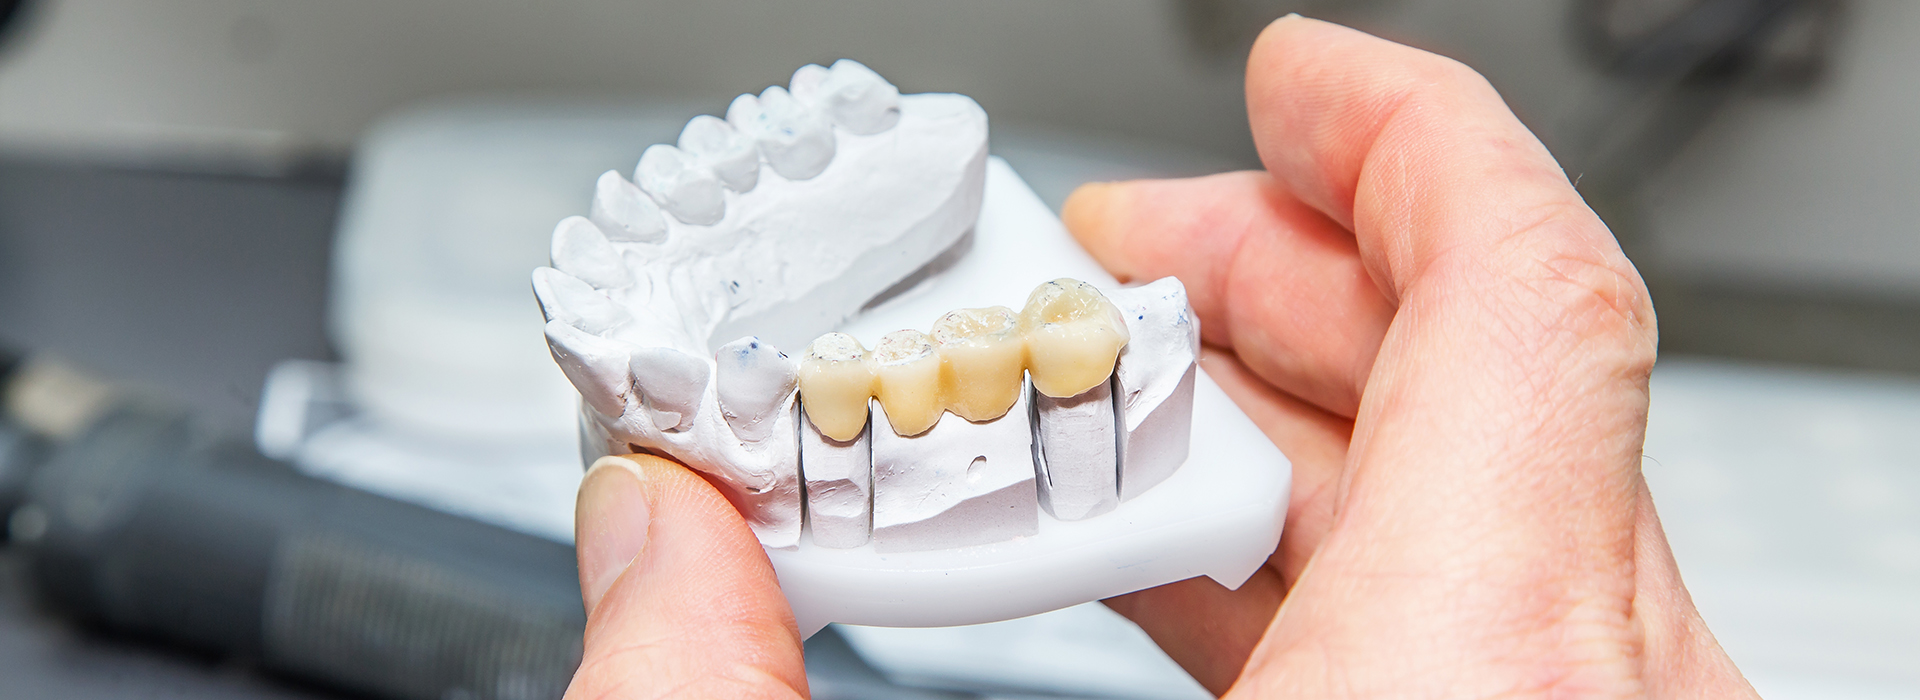 Steven R. Feigelson, DDS | Root Canal Therapy, Oral Exams and Bridges   Dentures